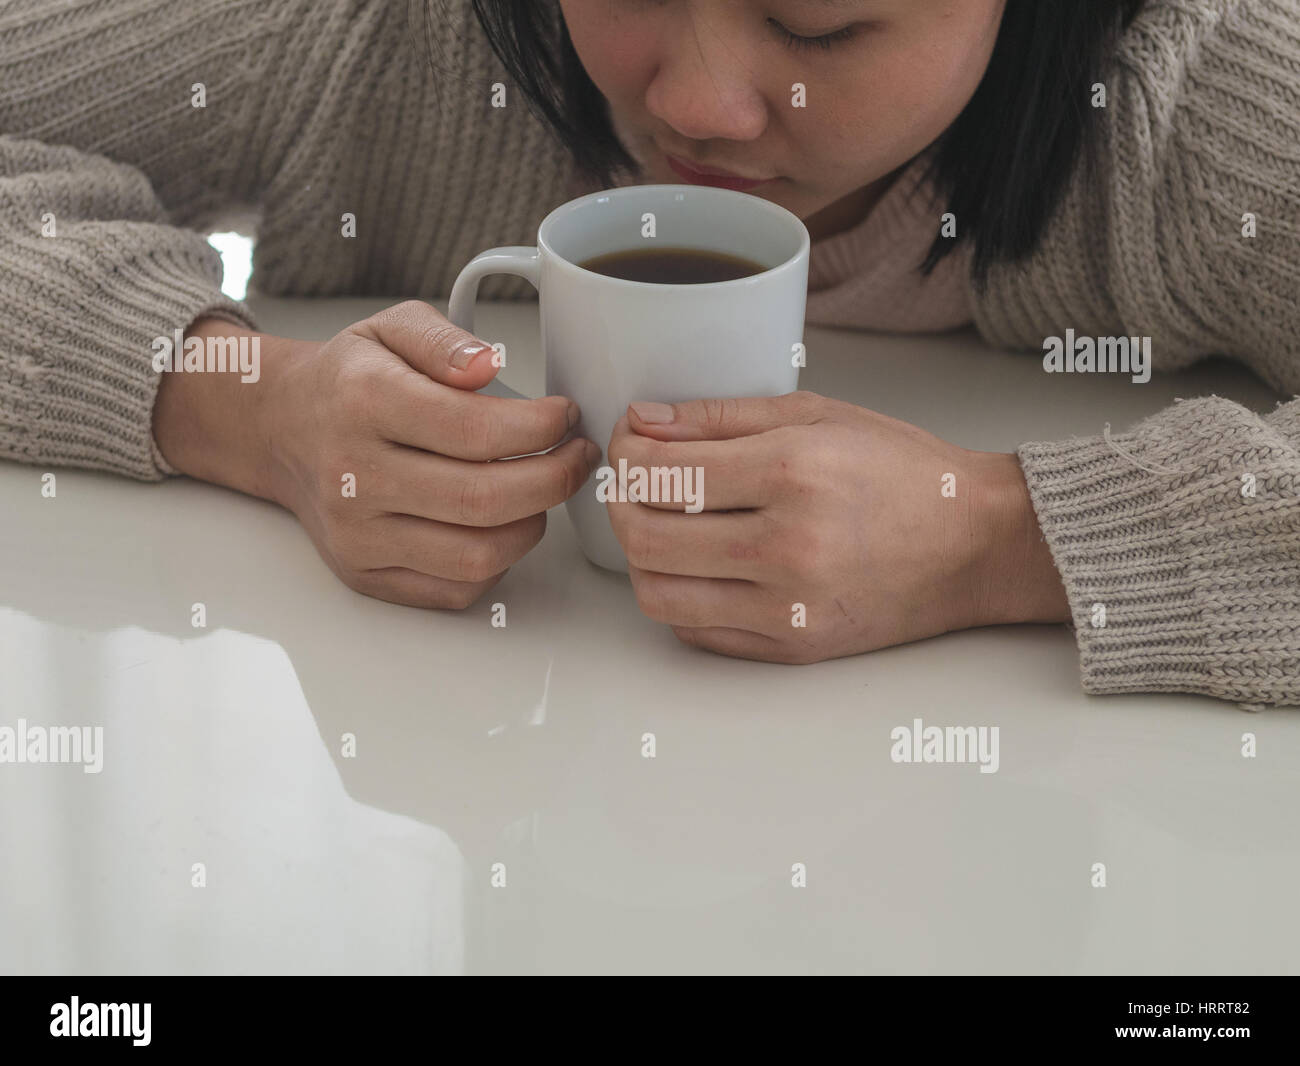 Woman drinking coffee and holding a white mug Stock Photo